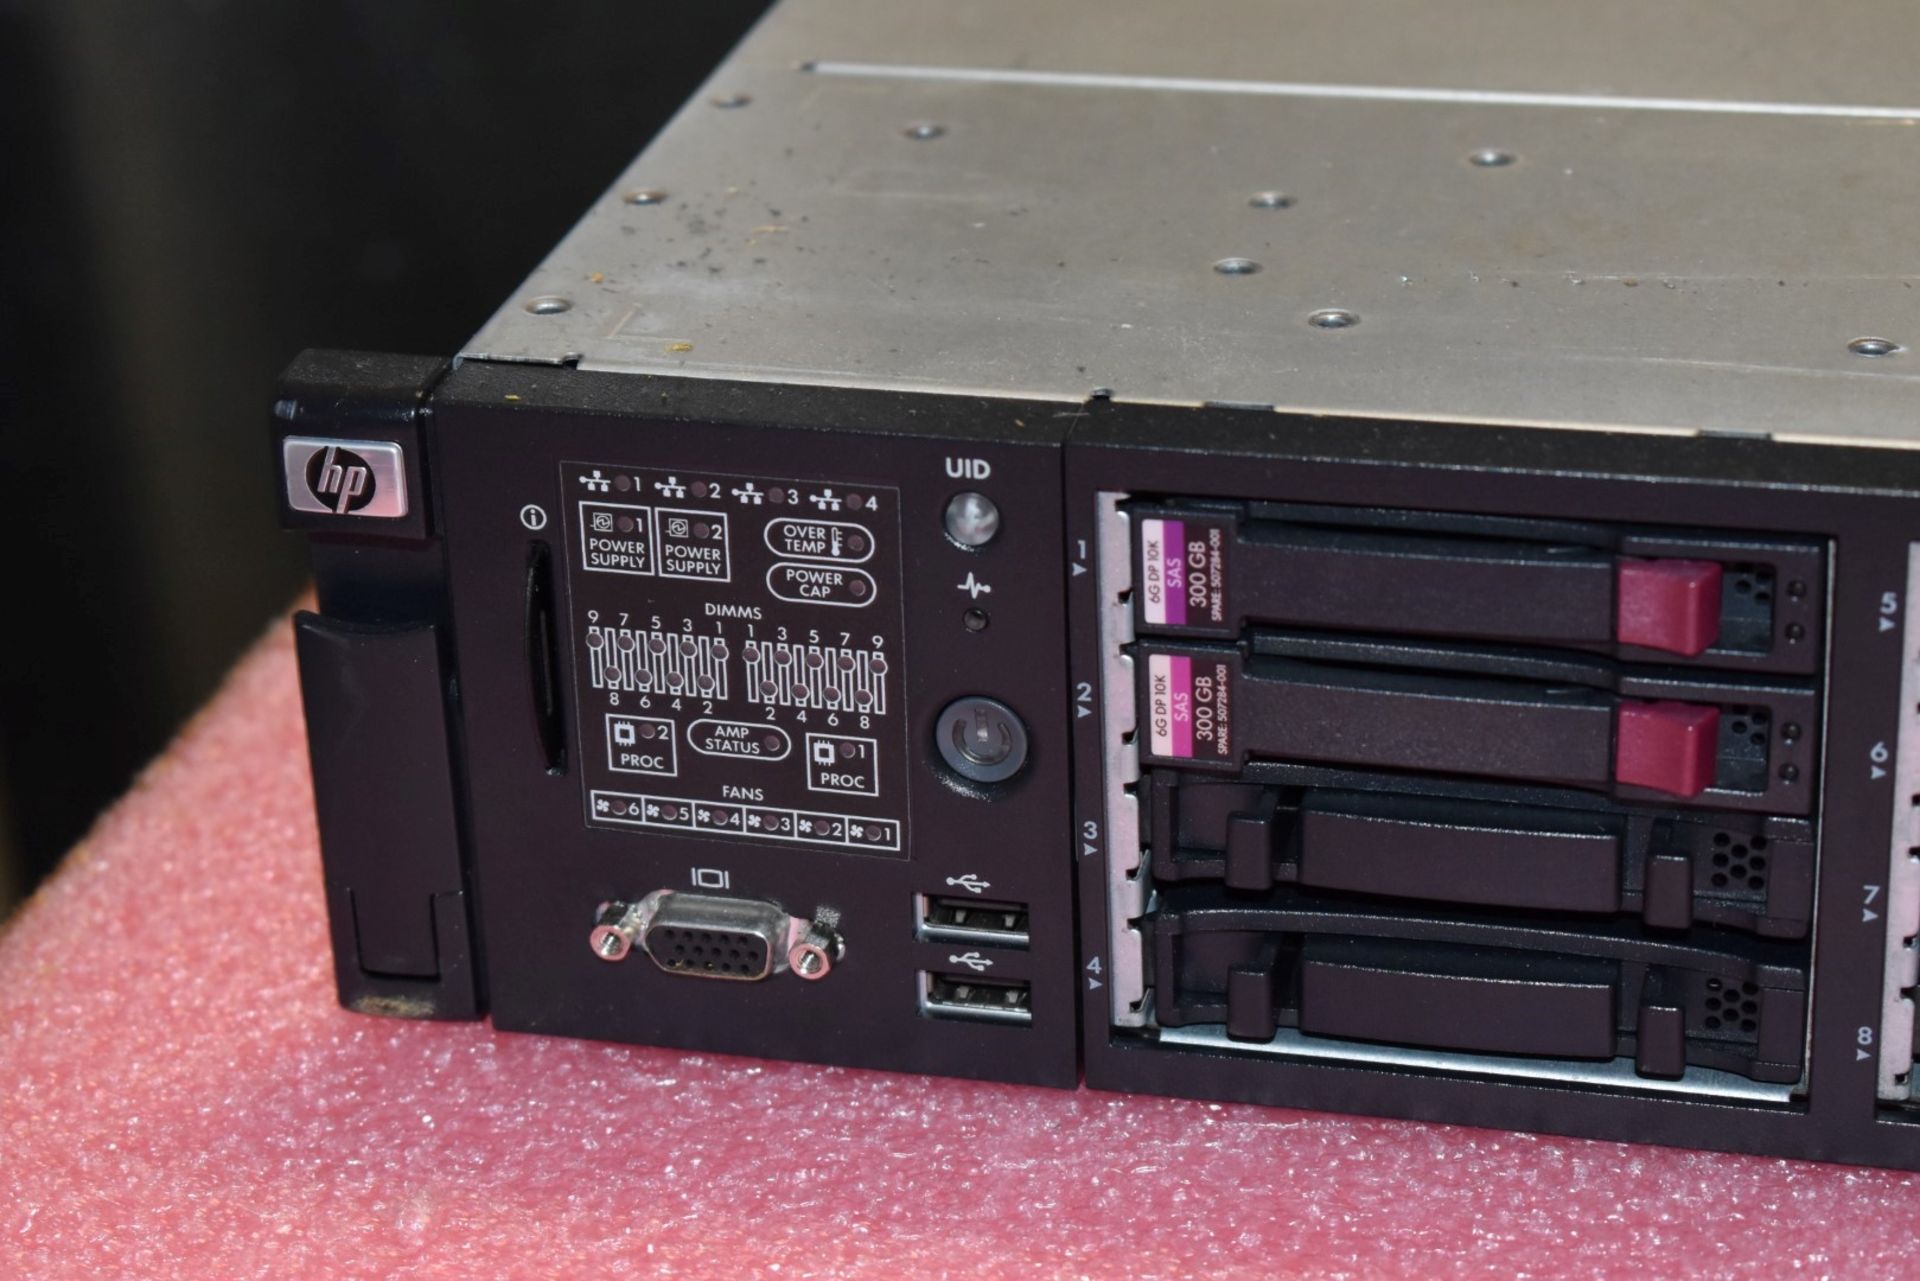 1 x HP ProLiant DL380 G7 Server With 2 x Intel Xeon X5650 Six Core 3.06ghz Processors and 92gb Ram - - Image 6 of 8